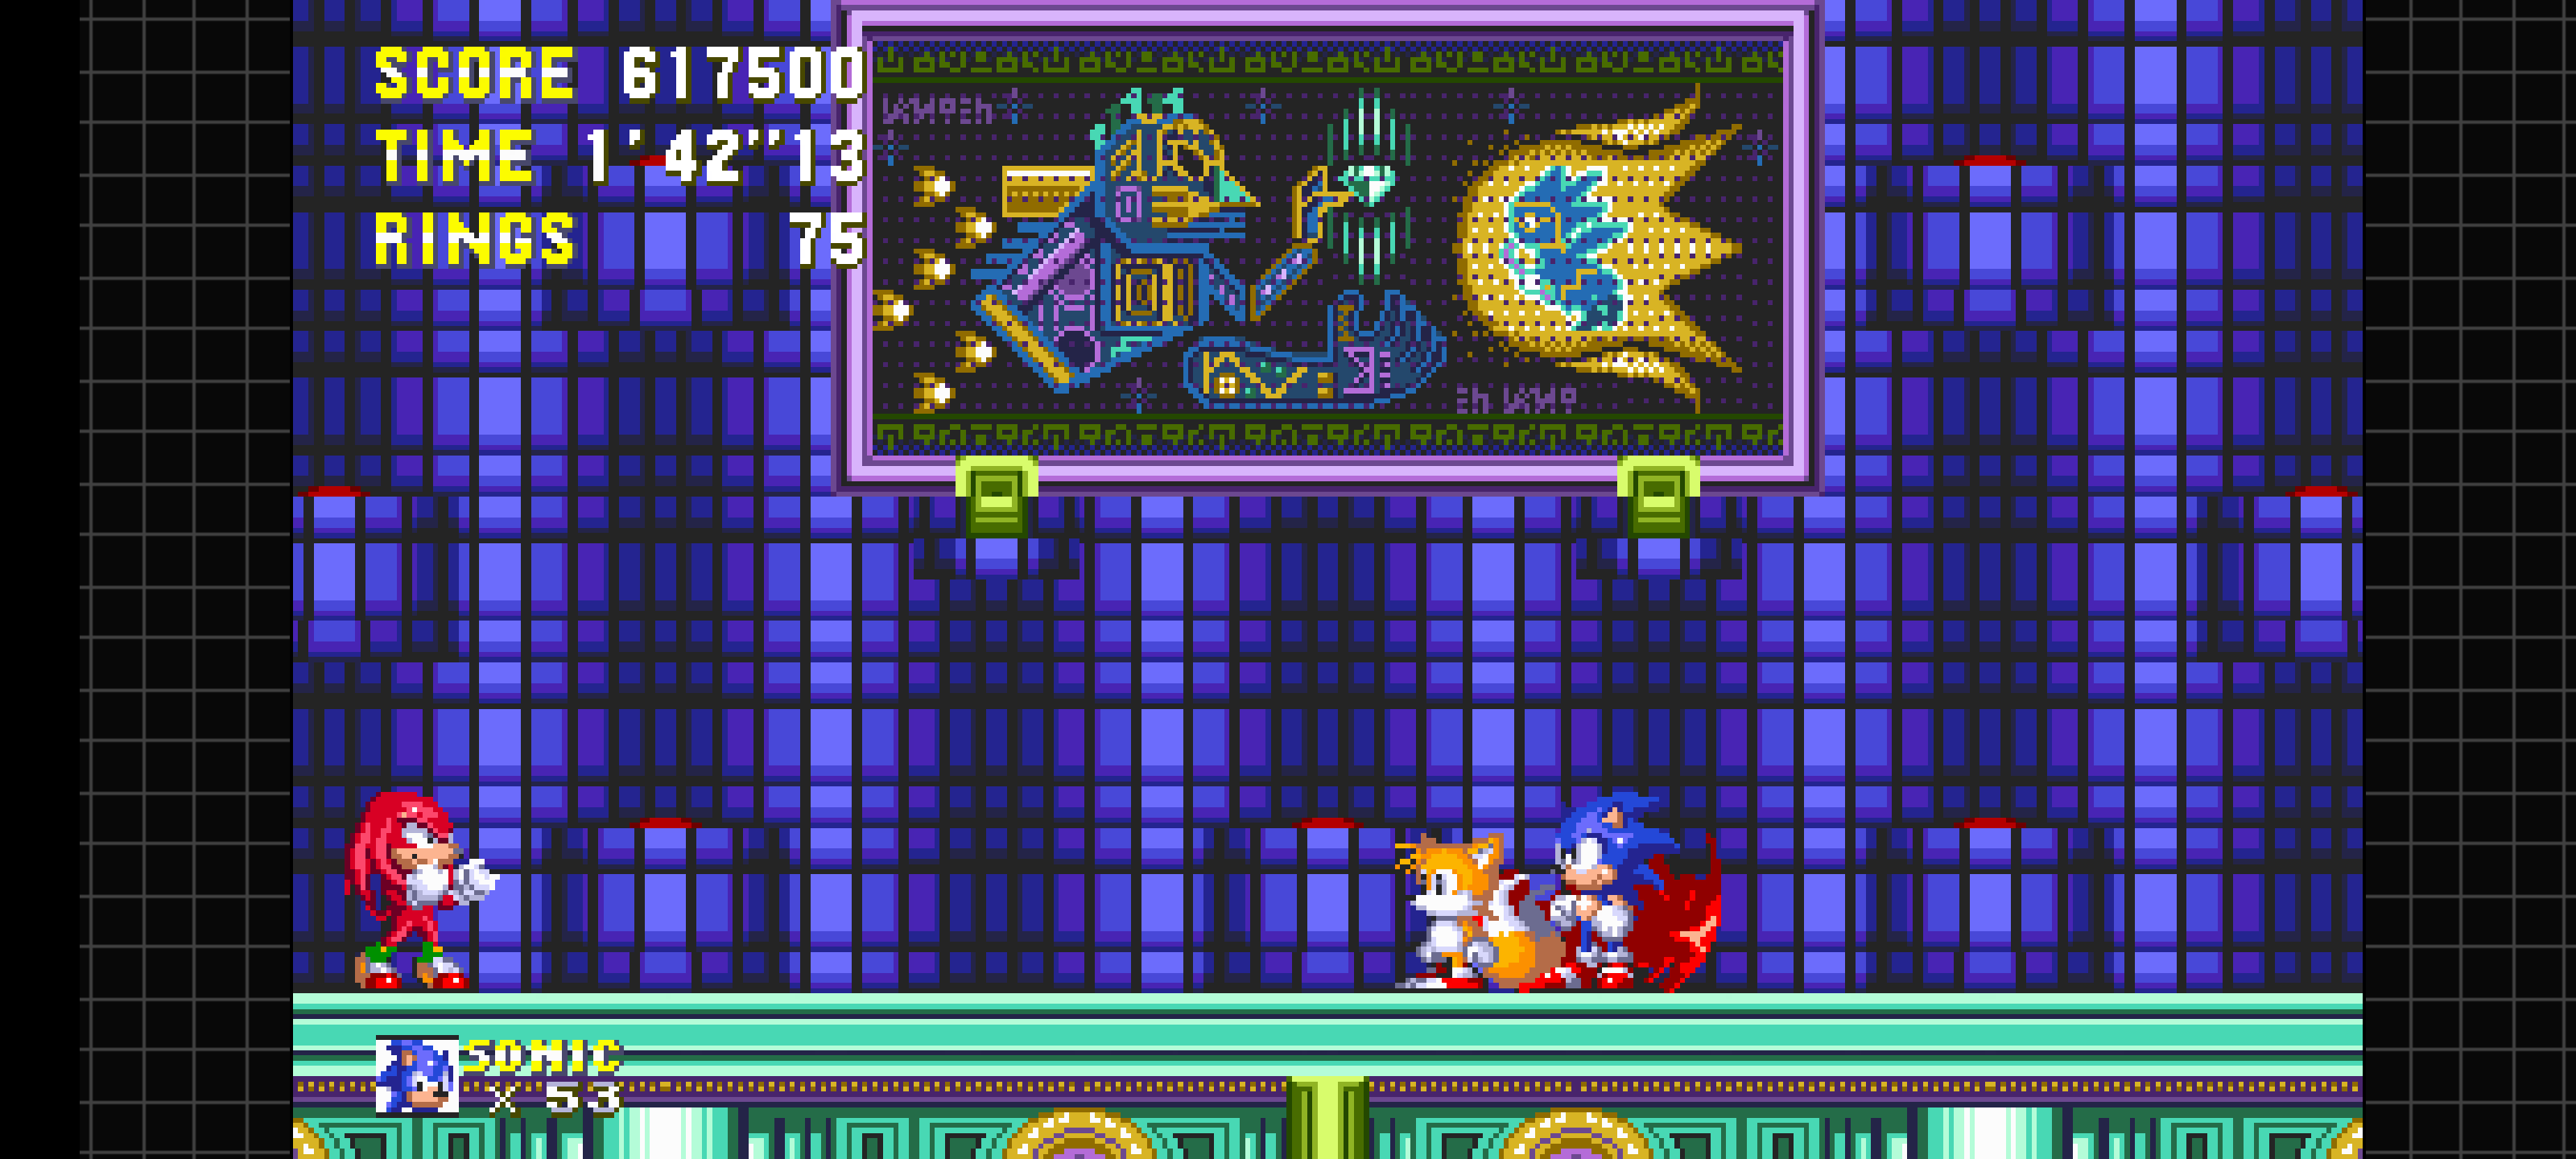 Sonic 3 air exe. Sonic 3 complete. Sonic 3 Air. Sonic 3 and Knuckles. Sonic 3 a.i.r.